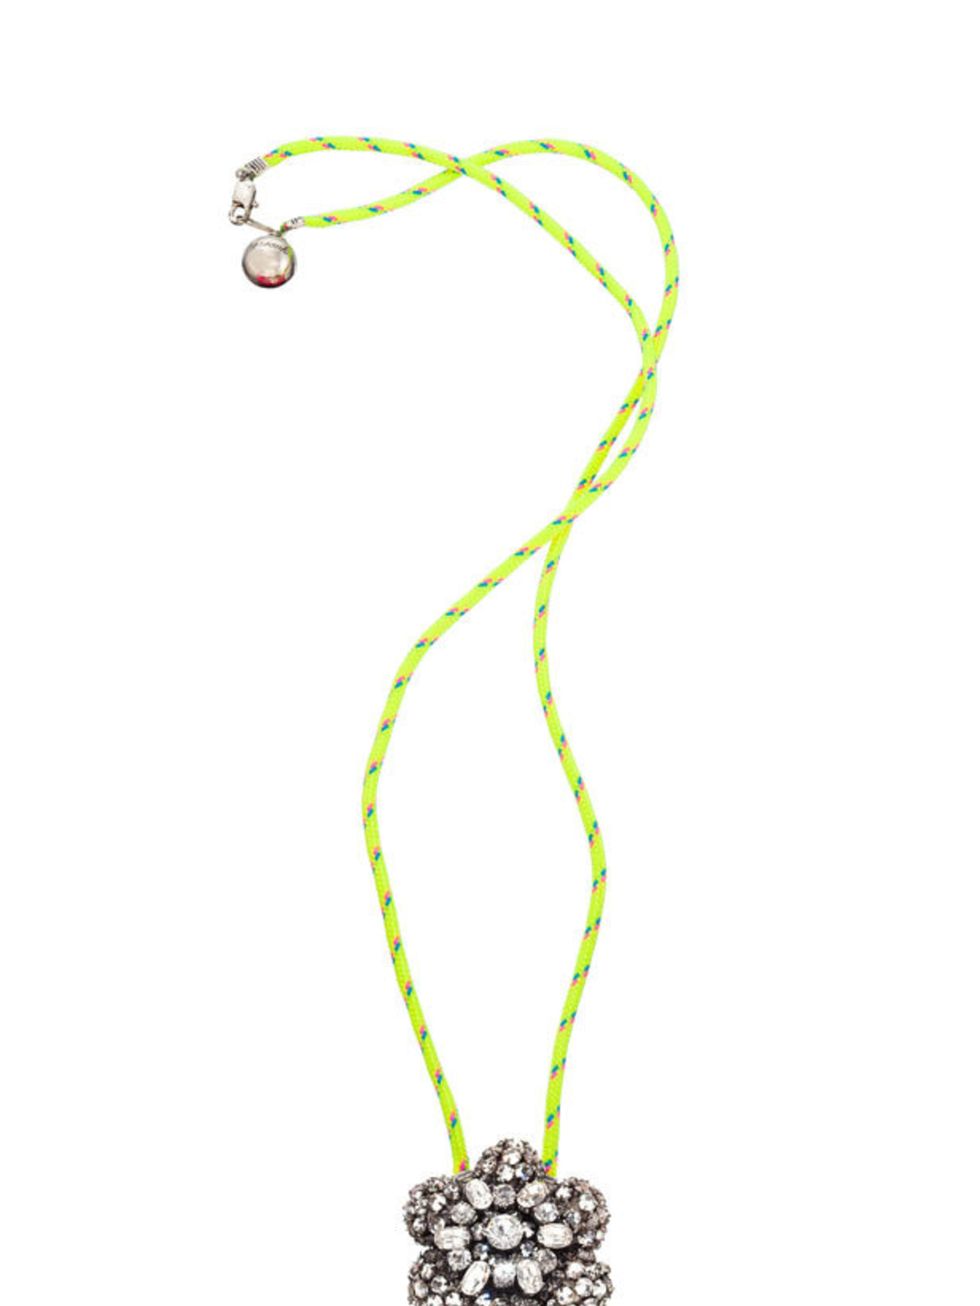 <p>Prepare to make a statement. The latest Swarovski collaboration mixes neon and gems- whats not to love?... <a href="http://www.swarovski-crystallized.com/store/uk/">Swarovski Crystallized</a> by Shourouk necklace, £185</p>